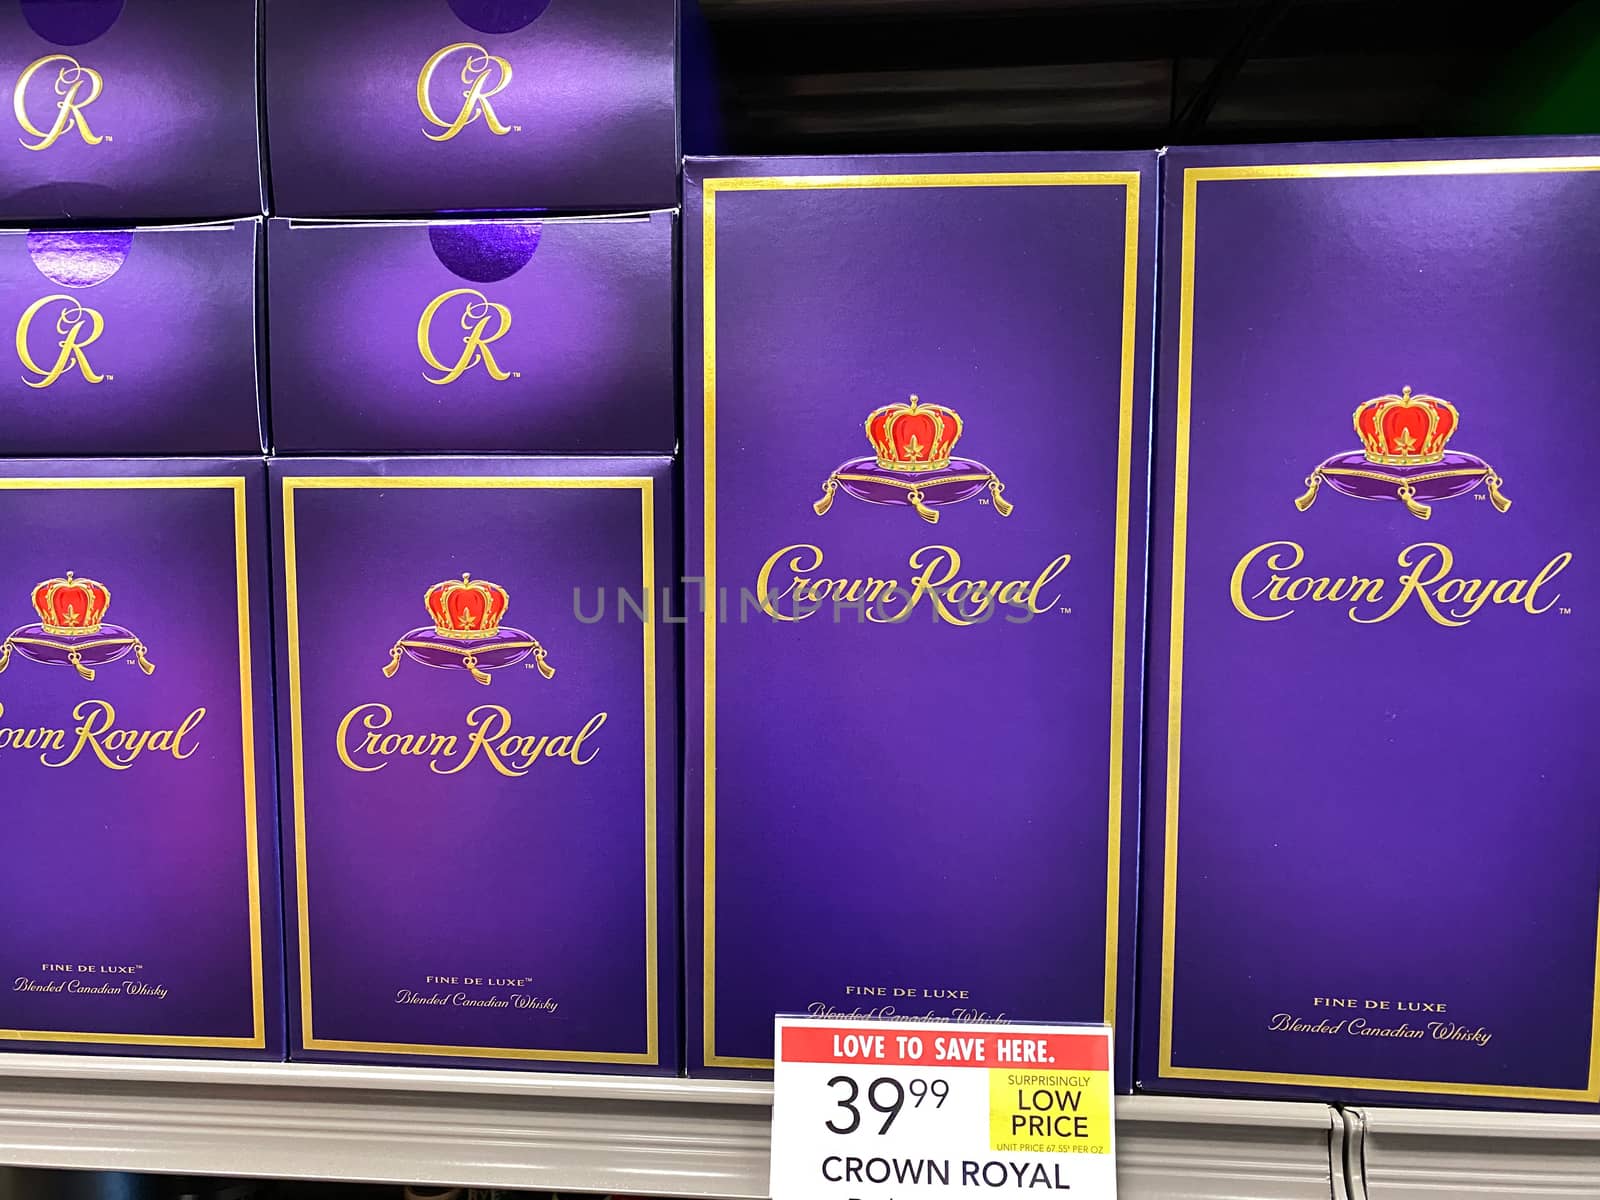 A display of Crown Royal Canadian Whiskey by Jshanebutt